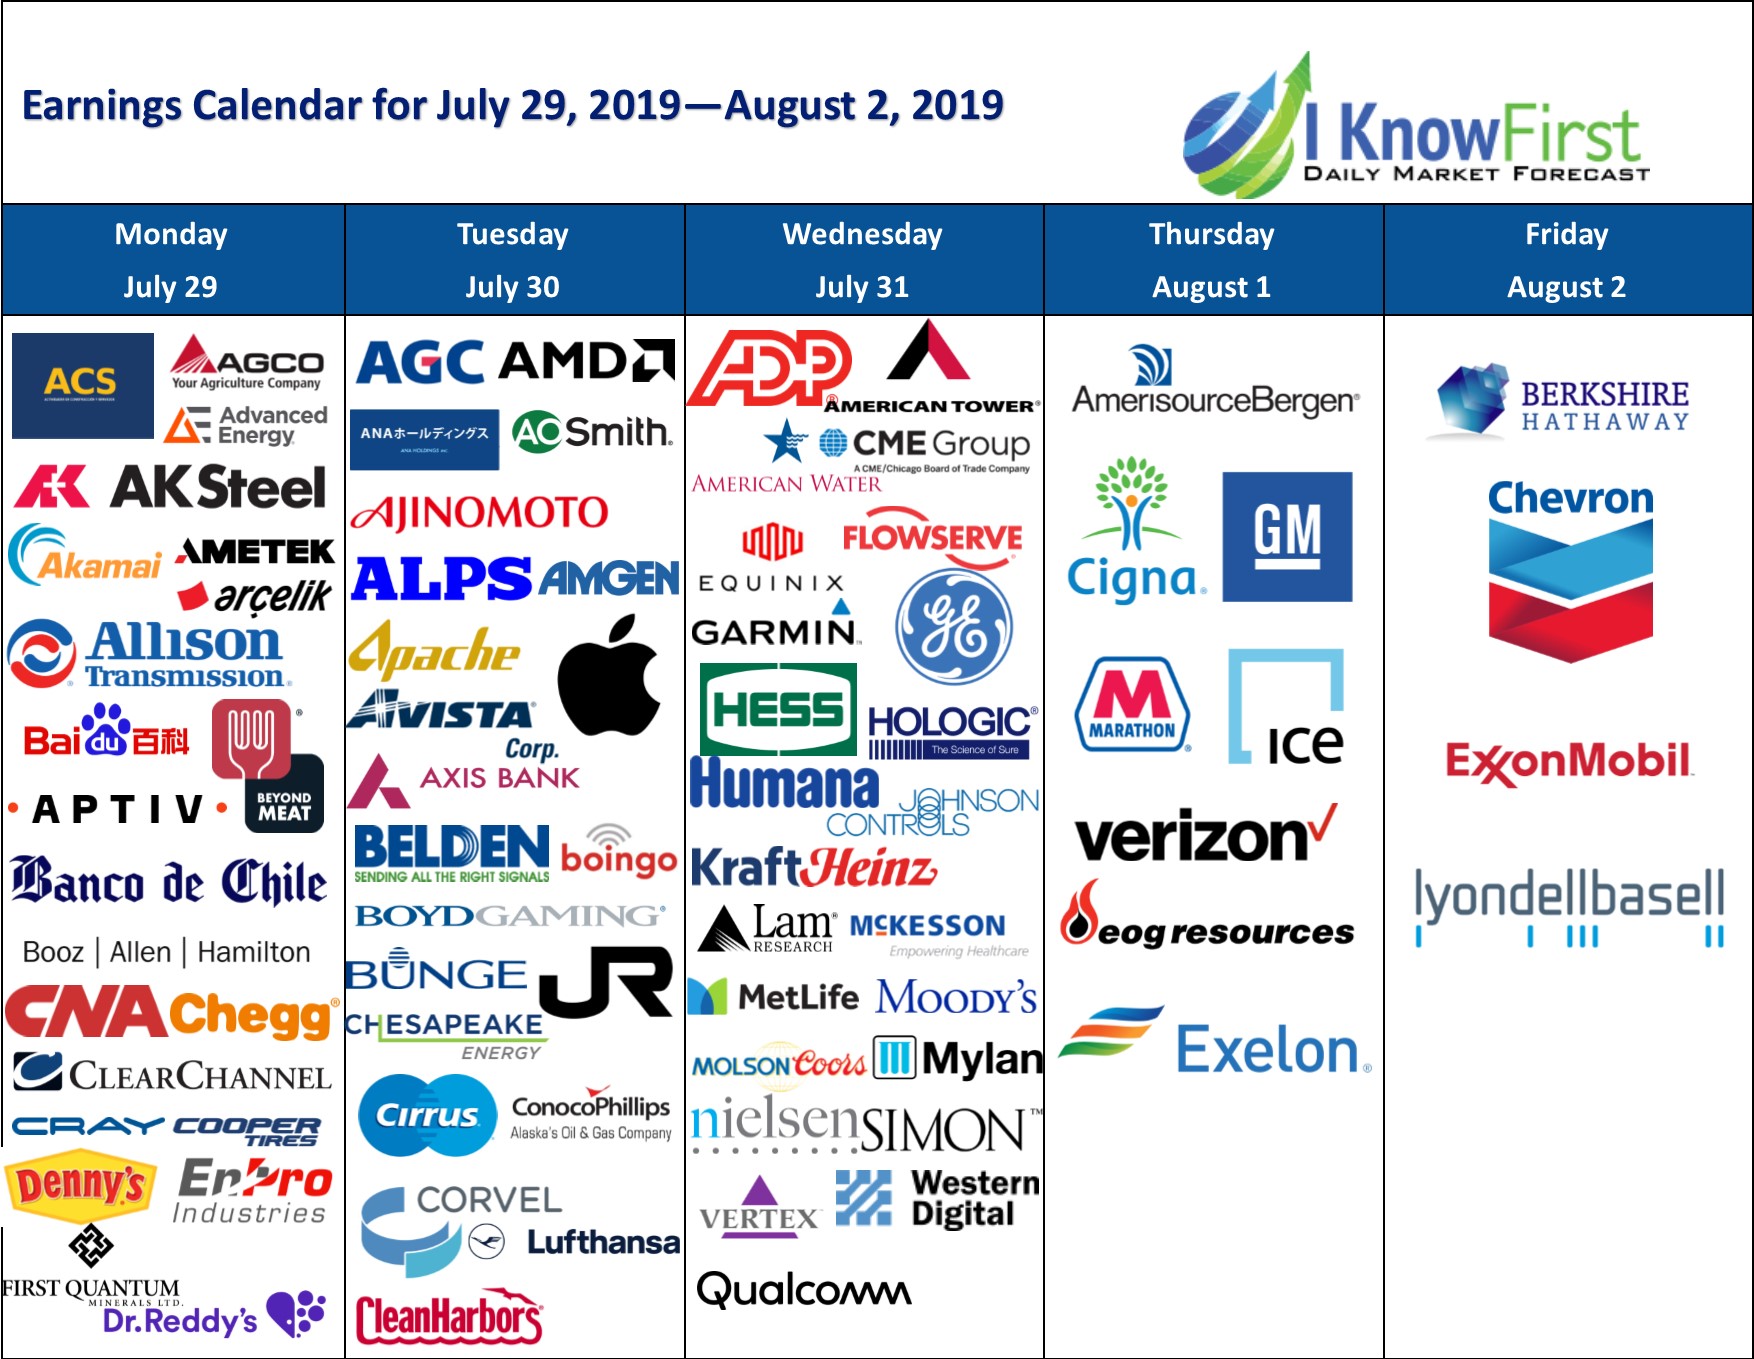 Stock Forecast Based On A Predictive Algorithm | I Know First |Week #31, 2019: Earnings Calendar